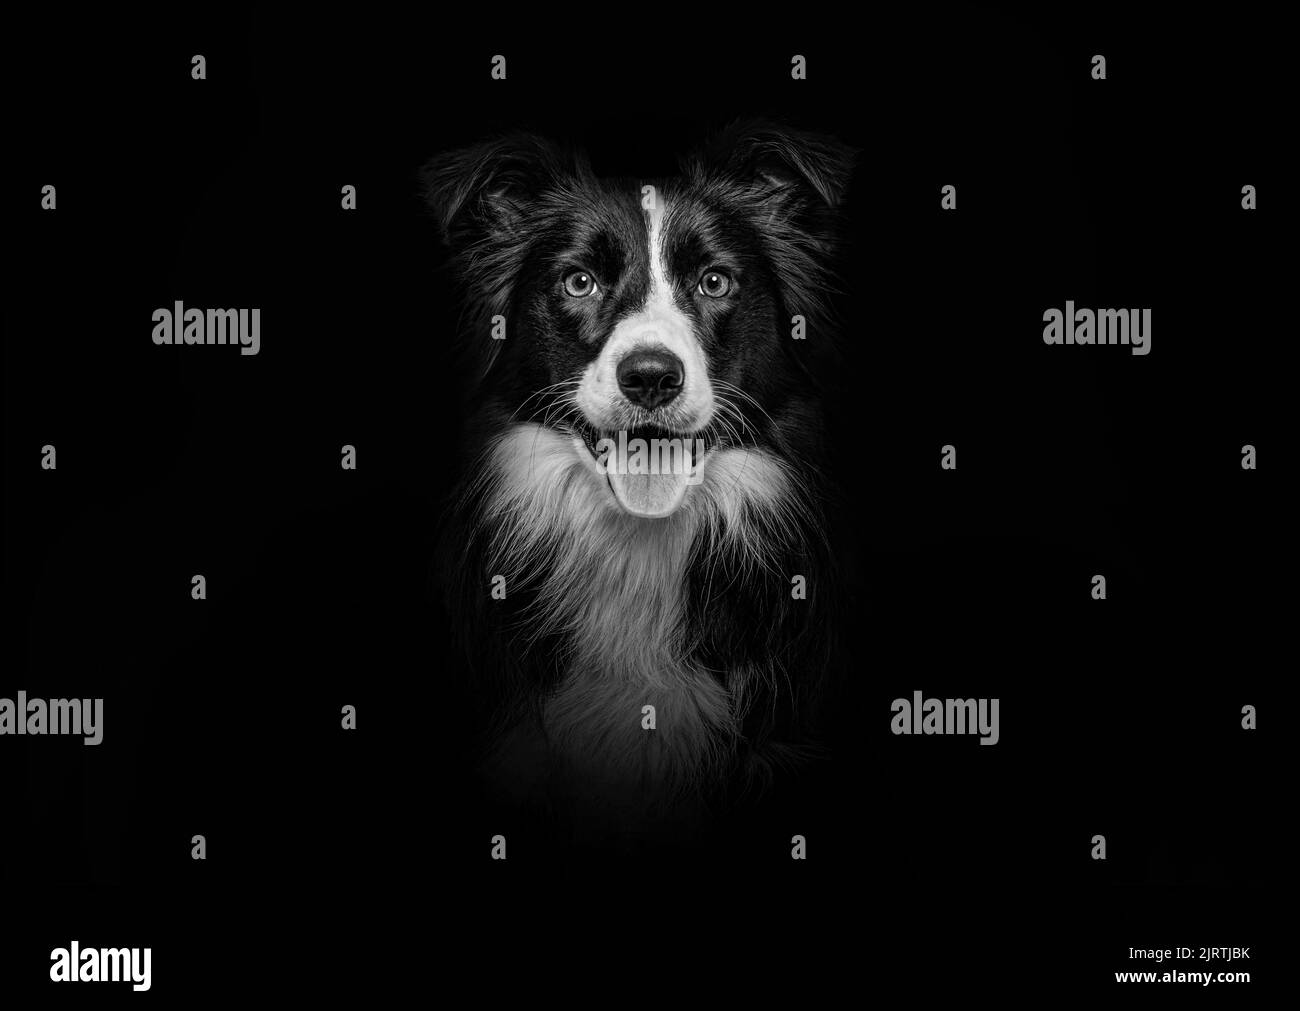 Close-up of Border Collie dog looking at the camera on black background Stock Photo